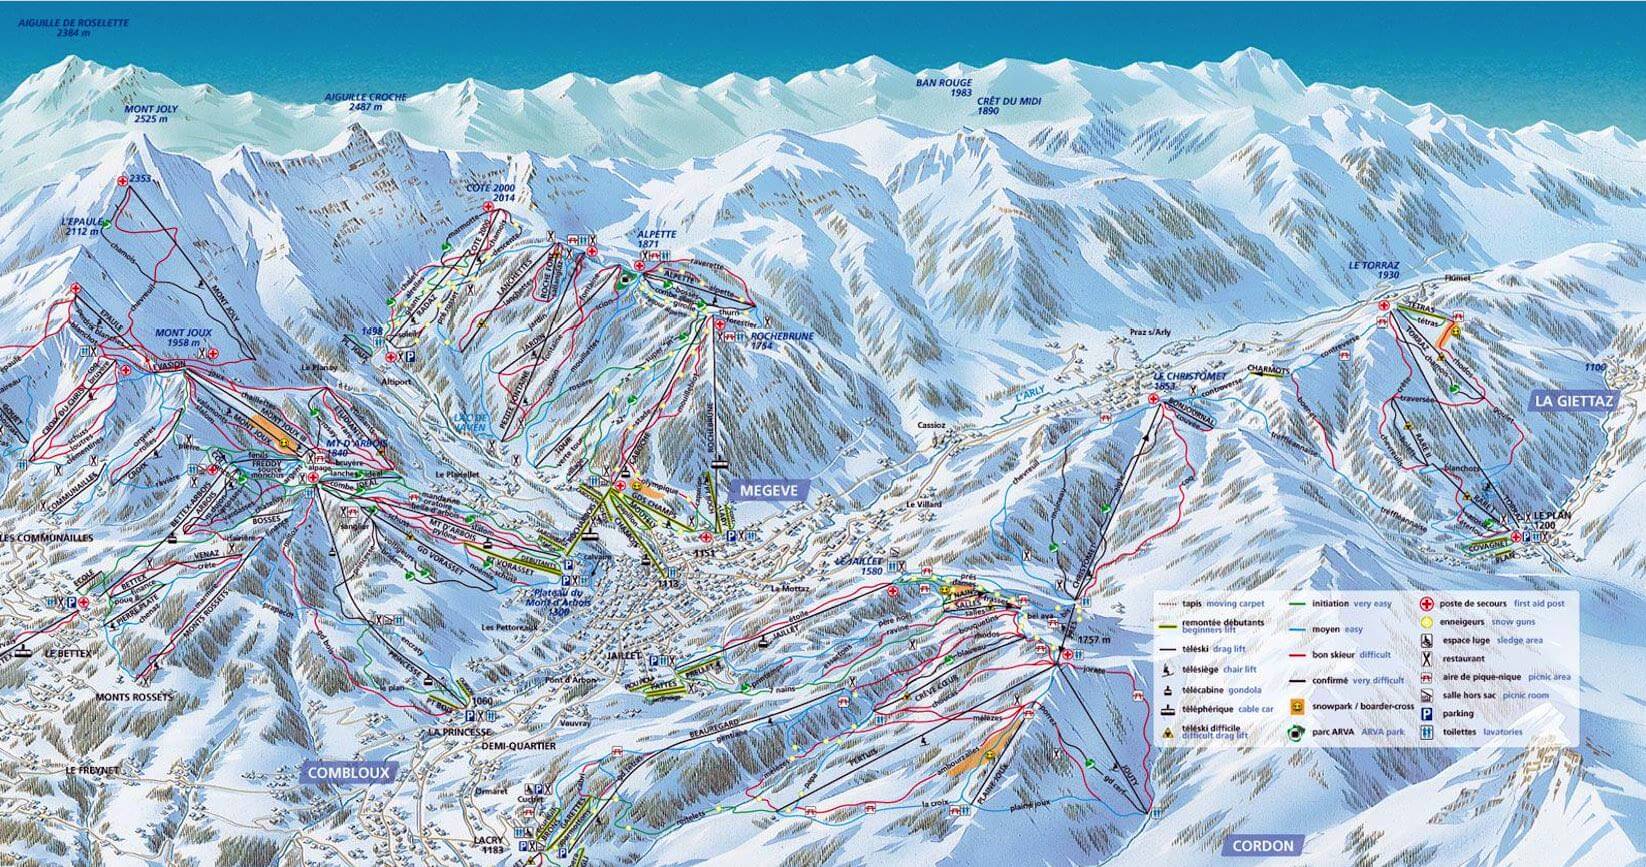 Ski Piste of Megeve for Skiing Lessons French Alpes